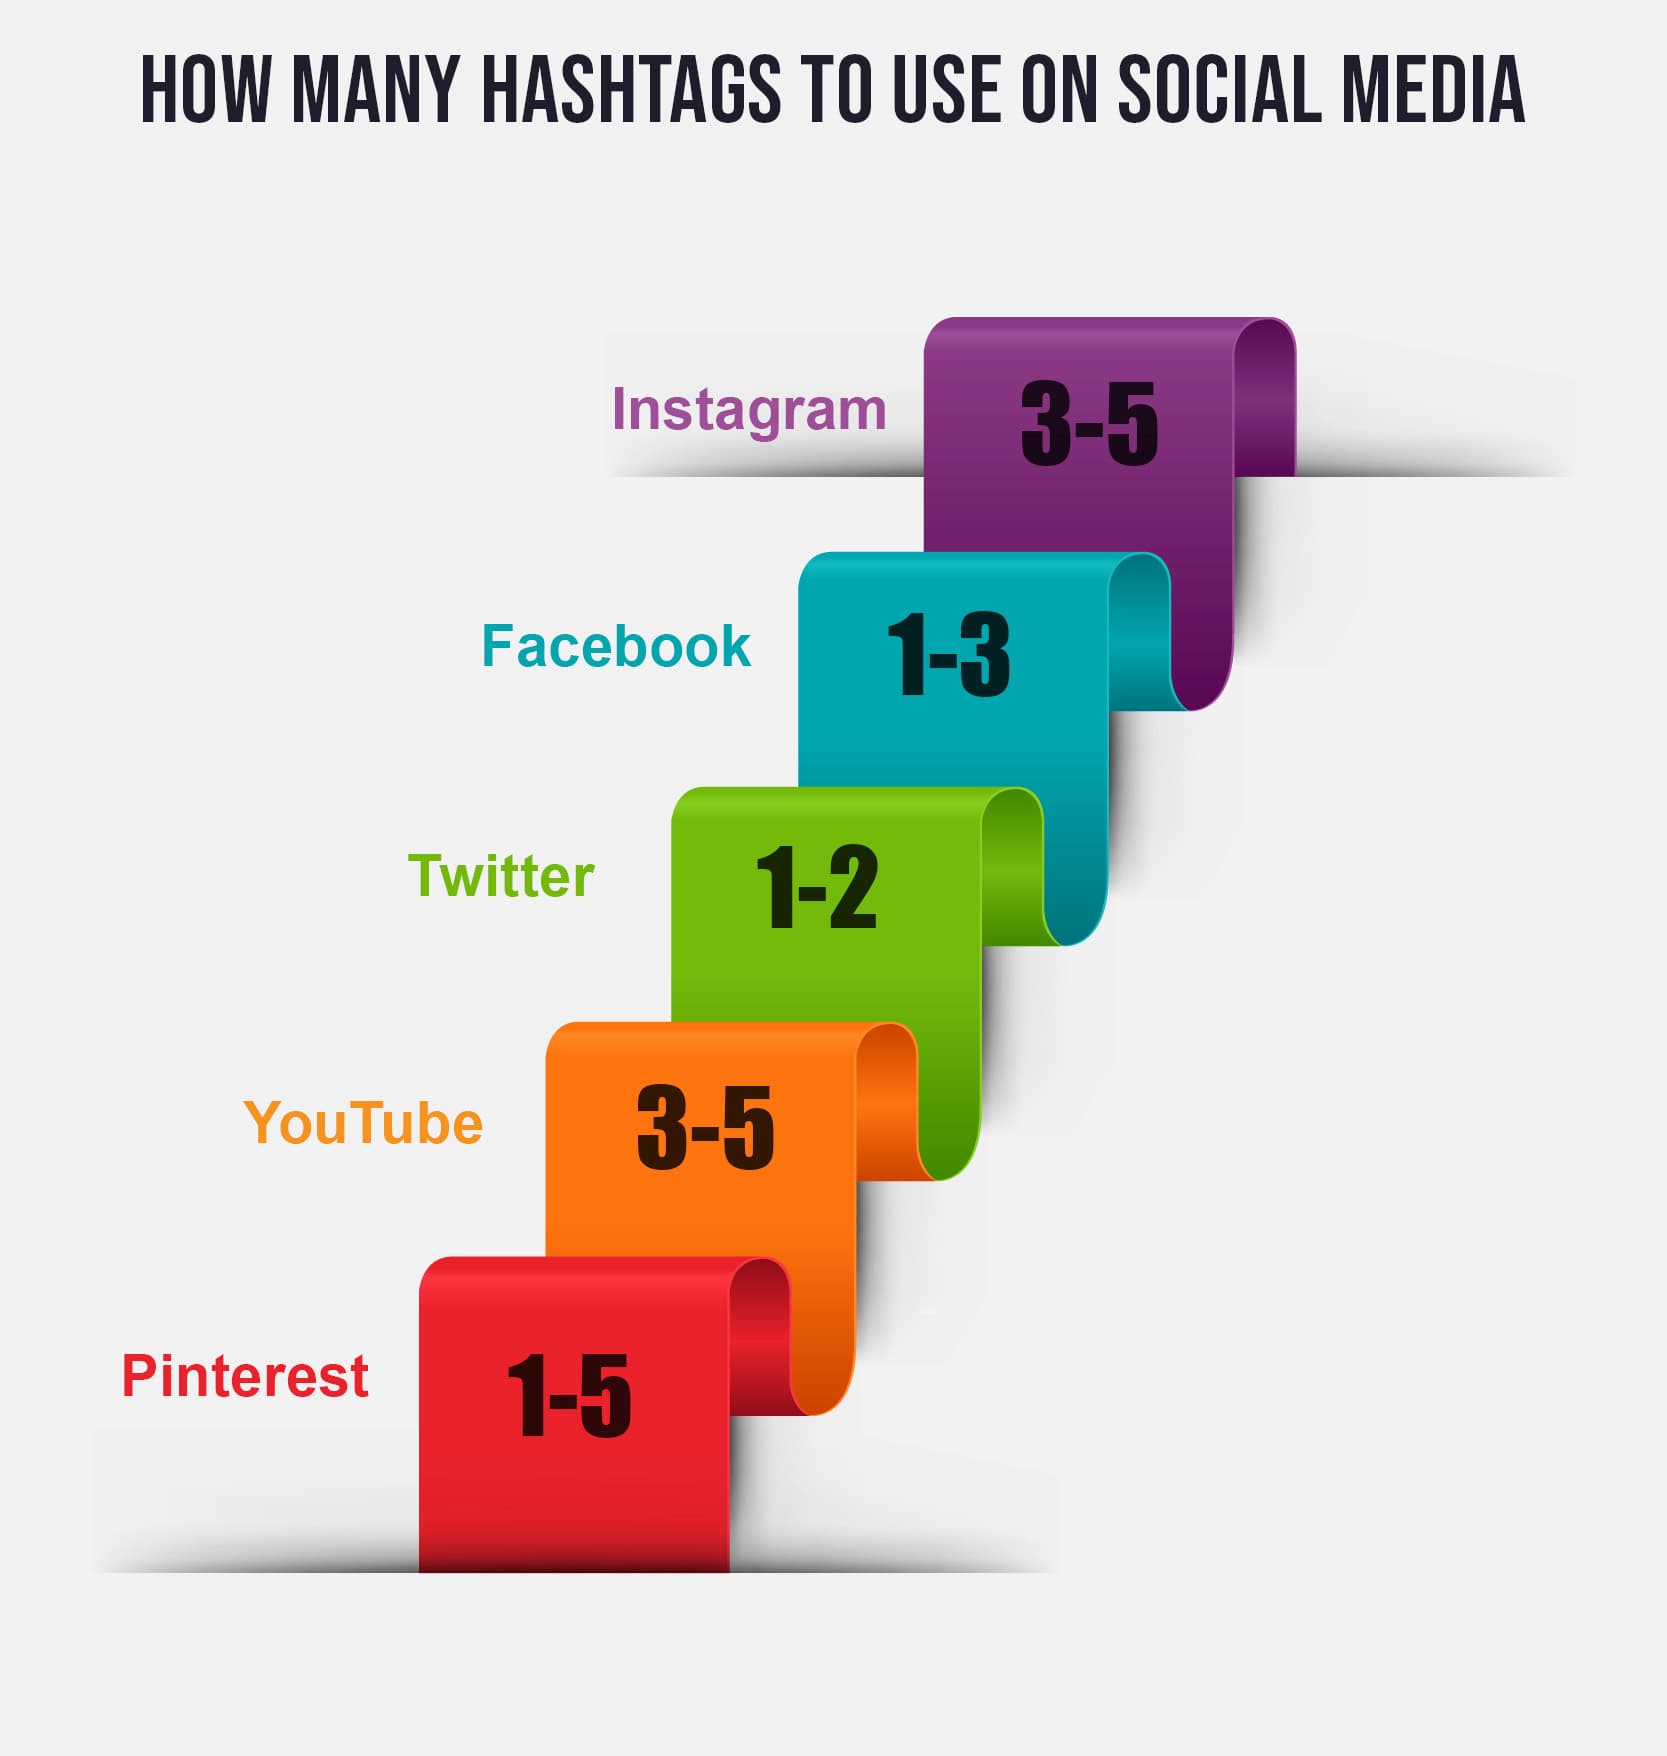 How many hashtags to use on social media can vary depending on the content and platform. Here are a few hashtag tips to consider: less is often more, quality over quantity.